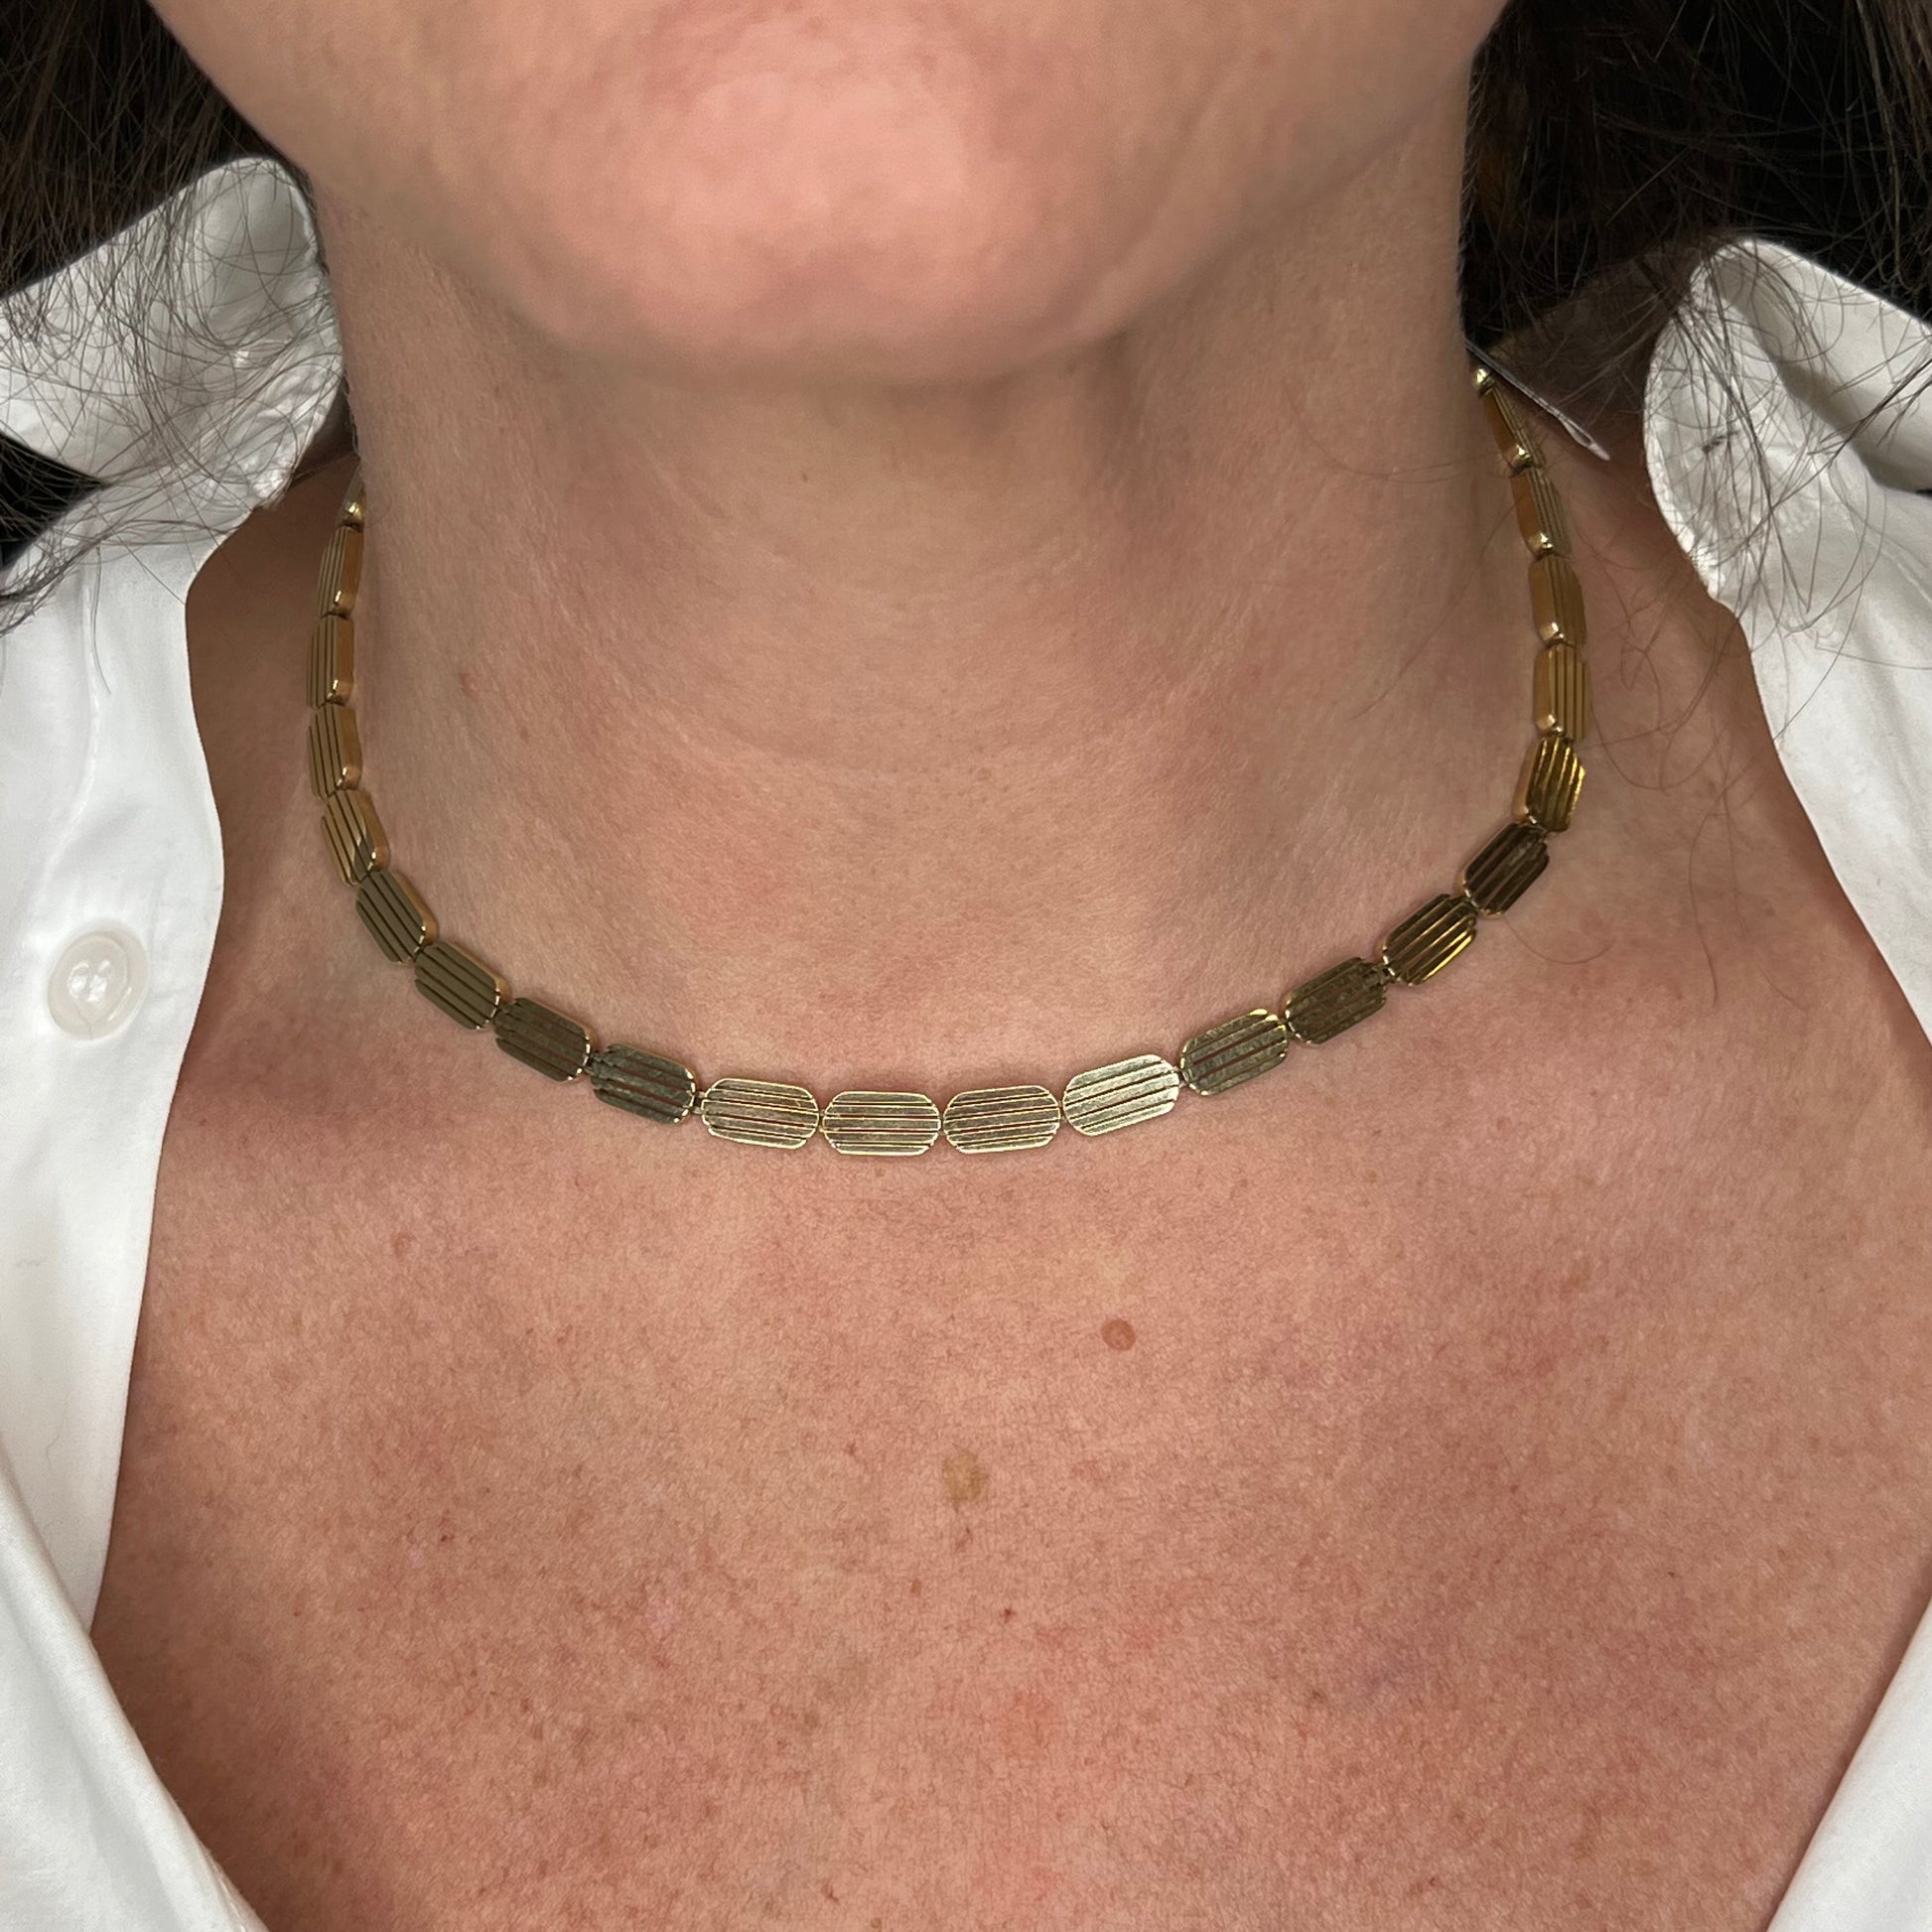 Mid-Century Decorative Chain Necklace in 14k Yellow GoldComposition: 14 Karat Yellow Gold Total Gram Weight: 21.5 g Inscription: 14k ITALY
      